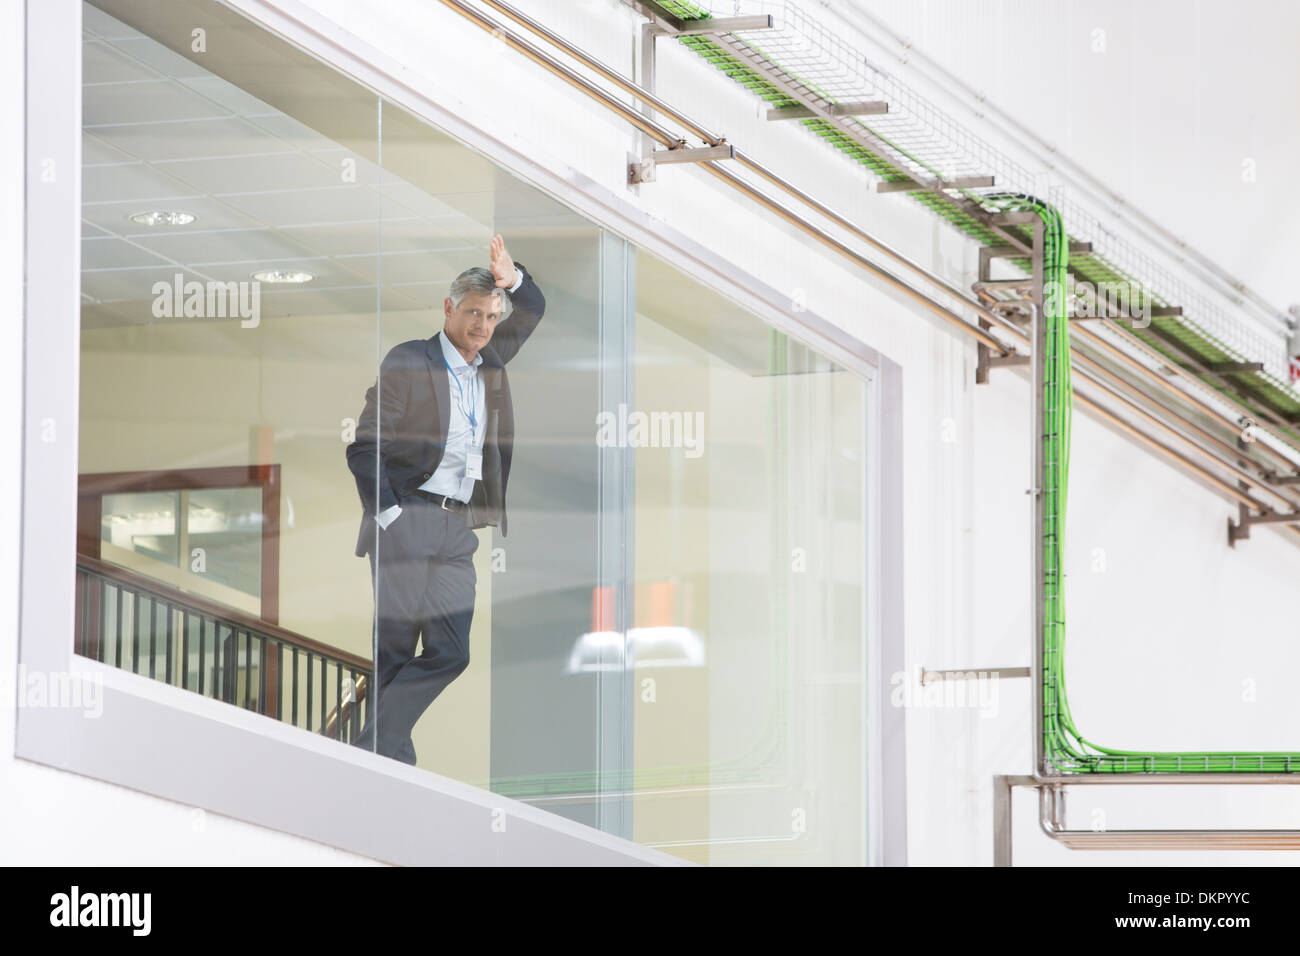 Supervisor leaning on glass window in warehouse Stock Photo